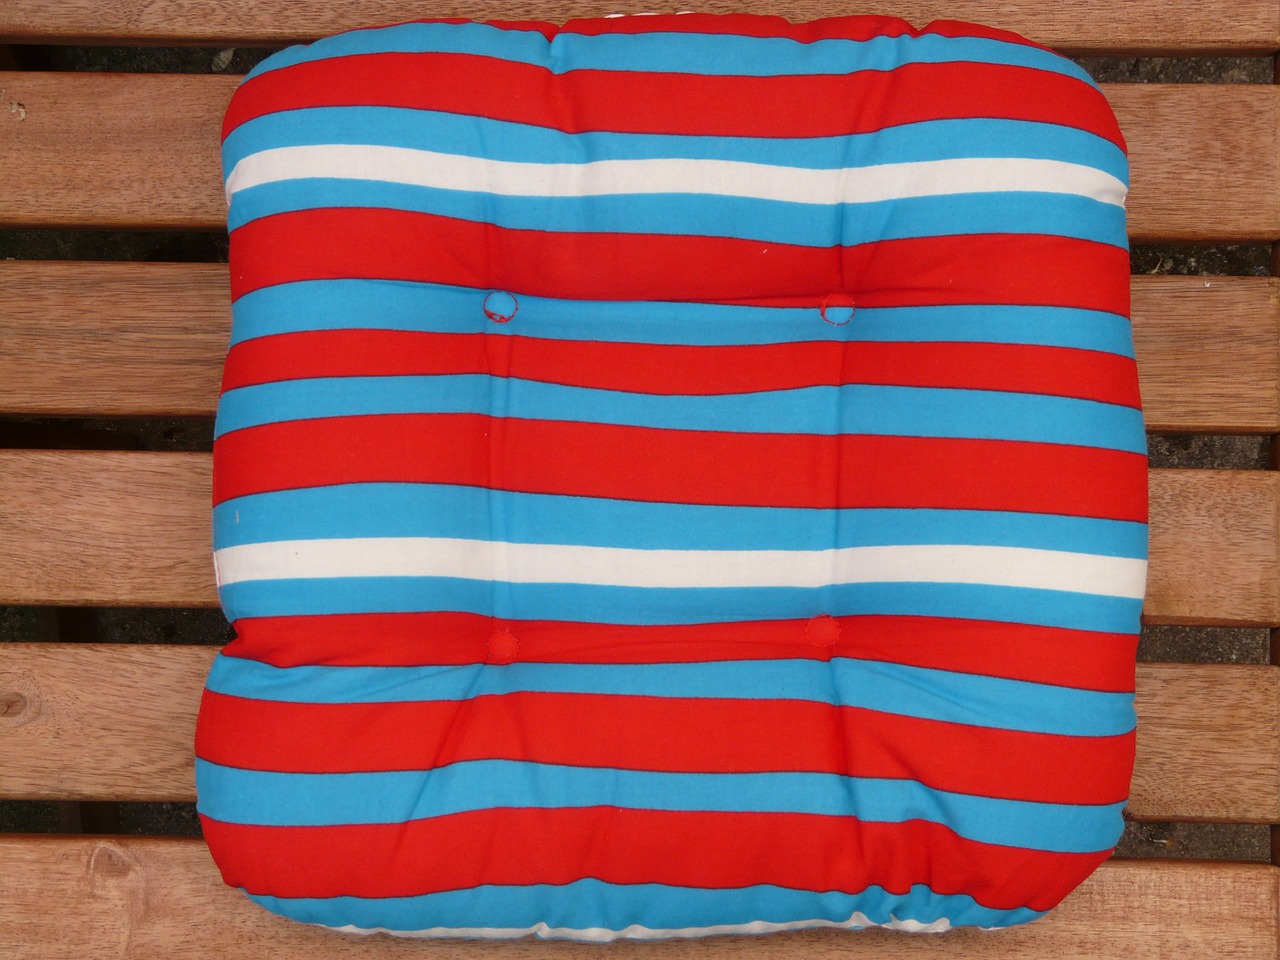 pillow,seat cushions,garden bench,striped,blue,red,white,sit,easily,stripes,free pictures, free photos, free images, royalty free, free illustrations, public domain